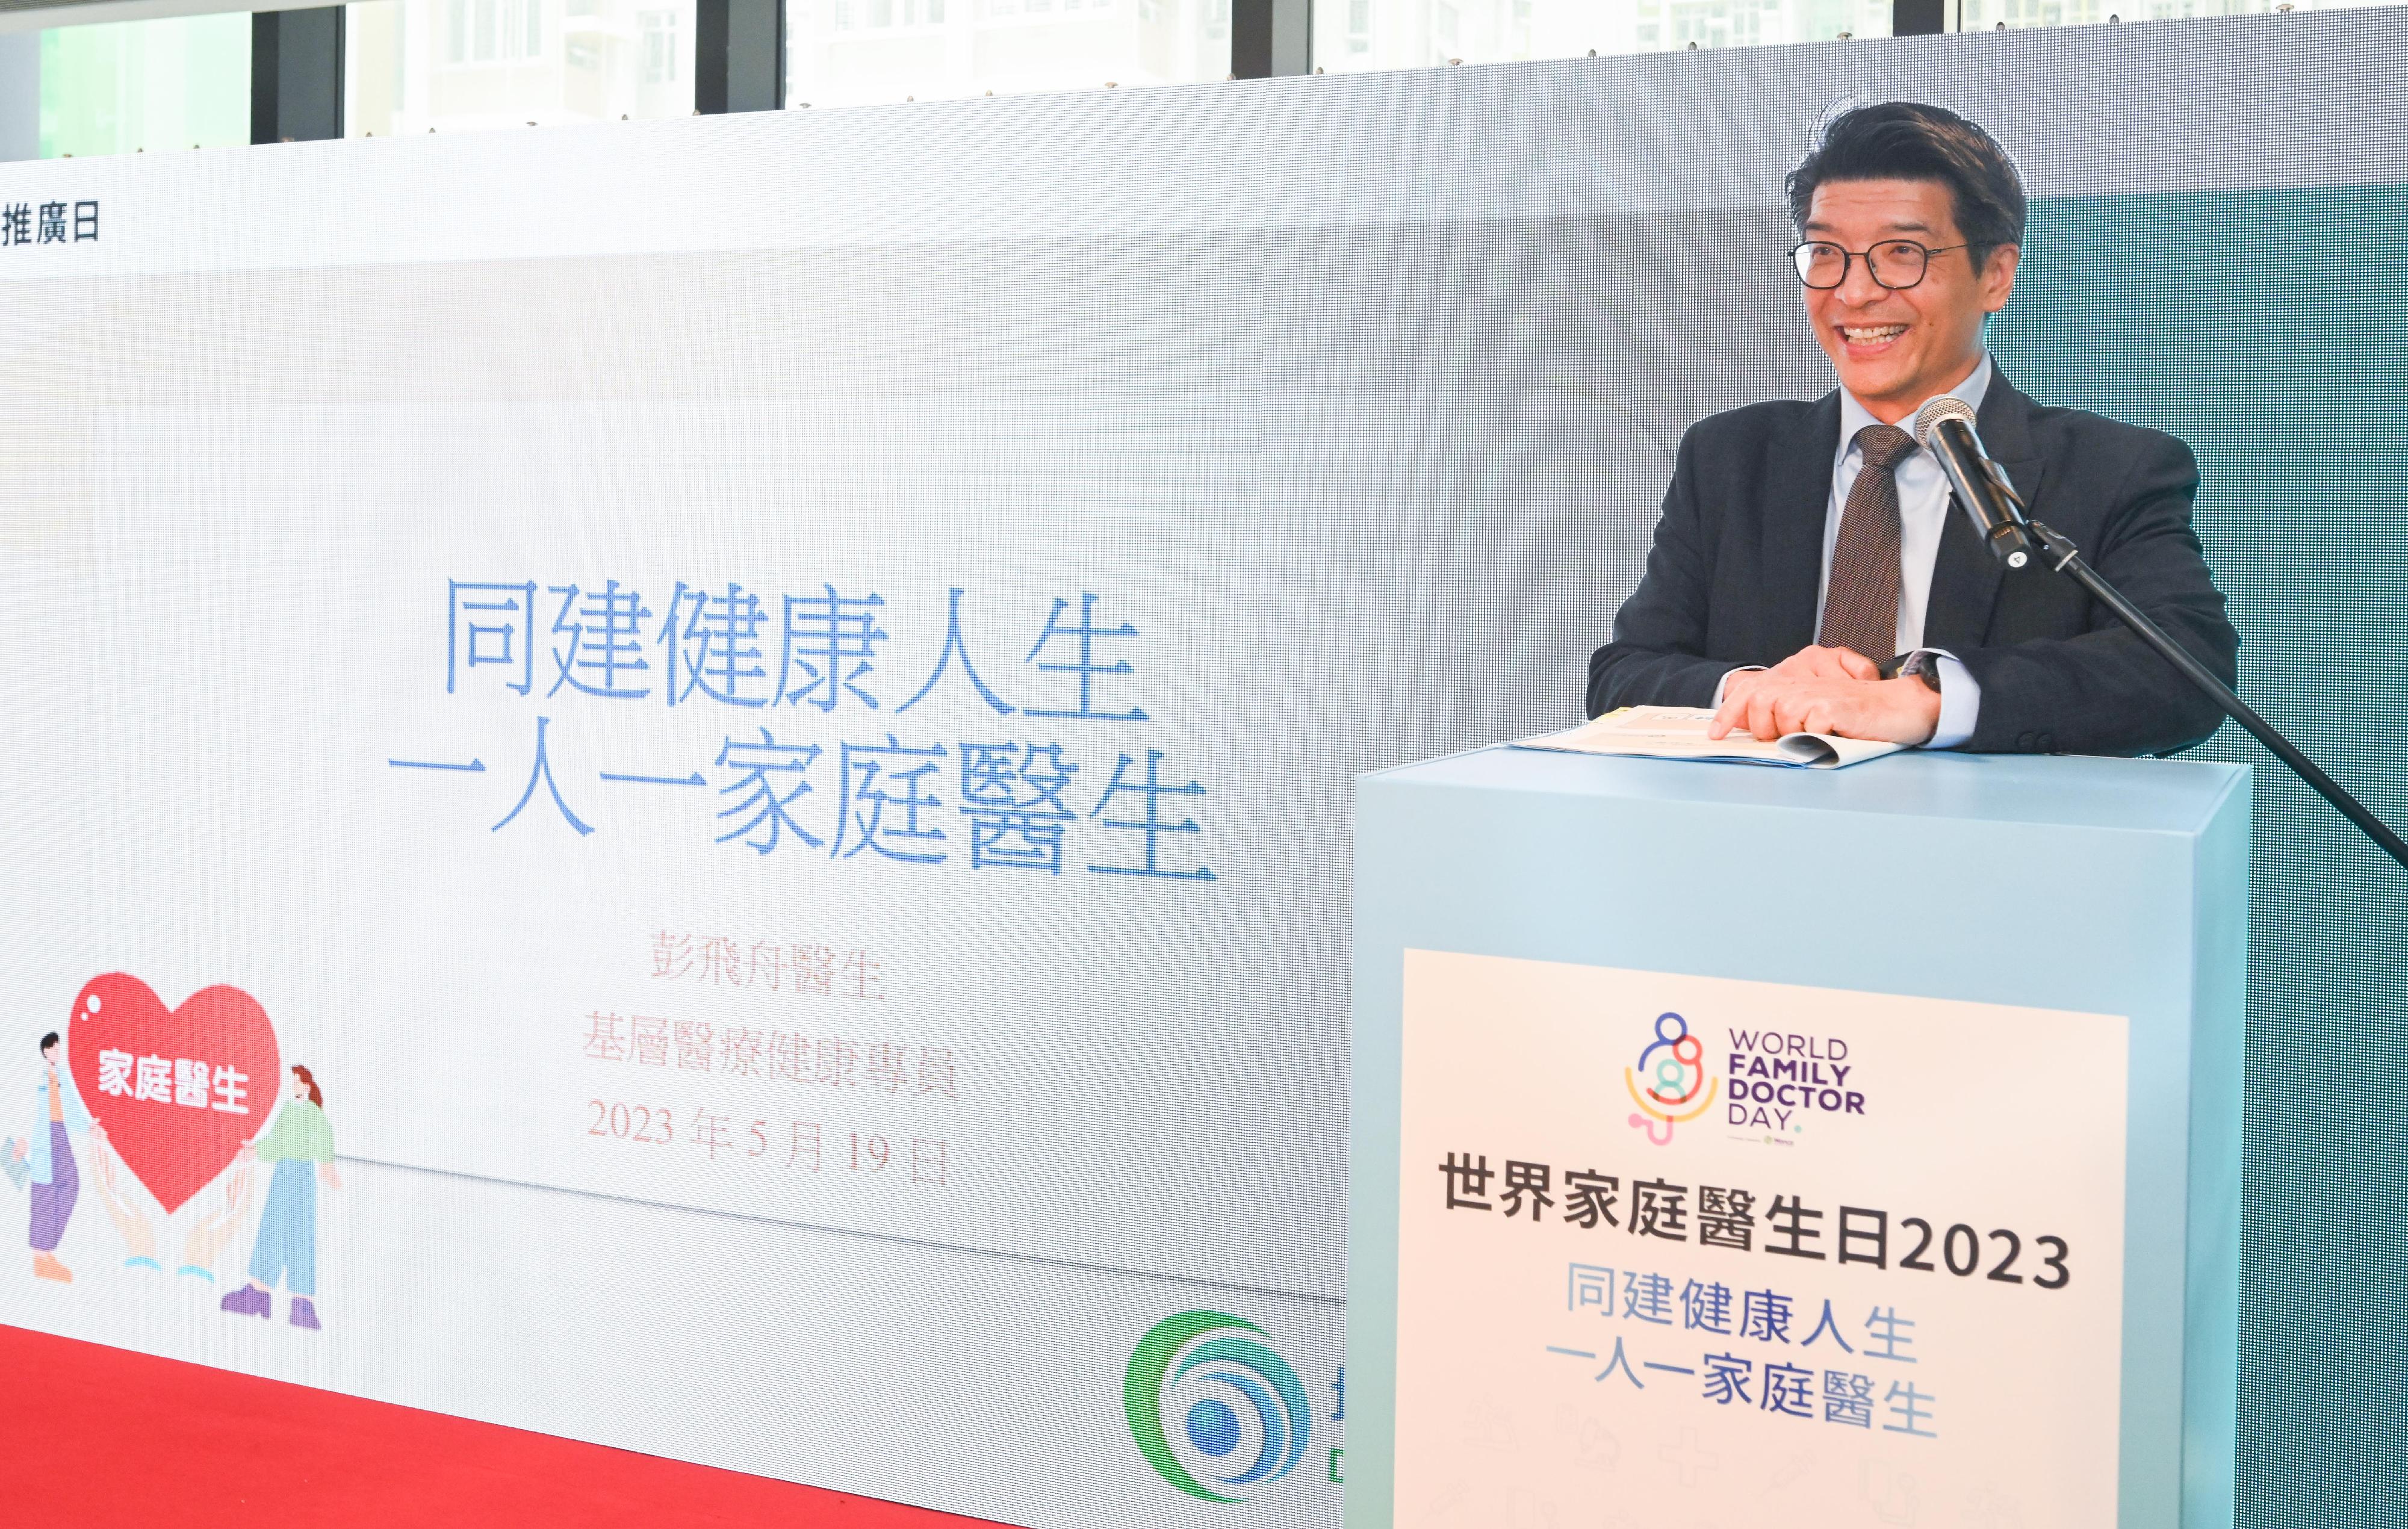 At the Family Doctor Promotion Day event today (May 19), the Commissioner for Primary Healthcare, Dr Pang Fei-chau, recognises the role of family doctors in the primary healthcare system and says that family doctors will be important partners of the Government in the implementation of the Chronic Disease Co-Care Scheme.